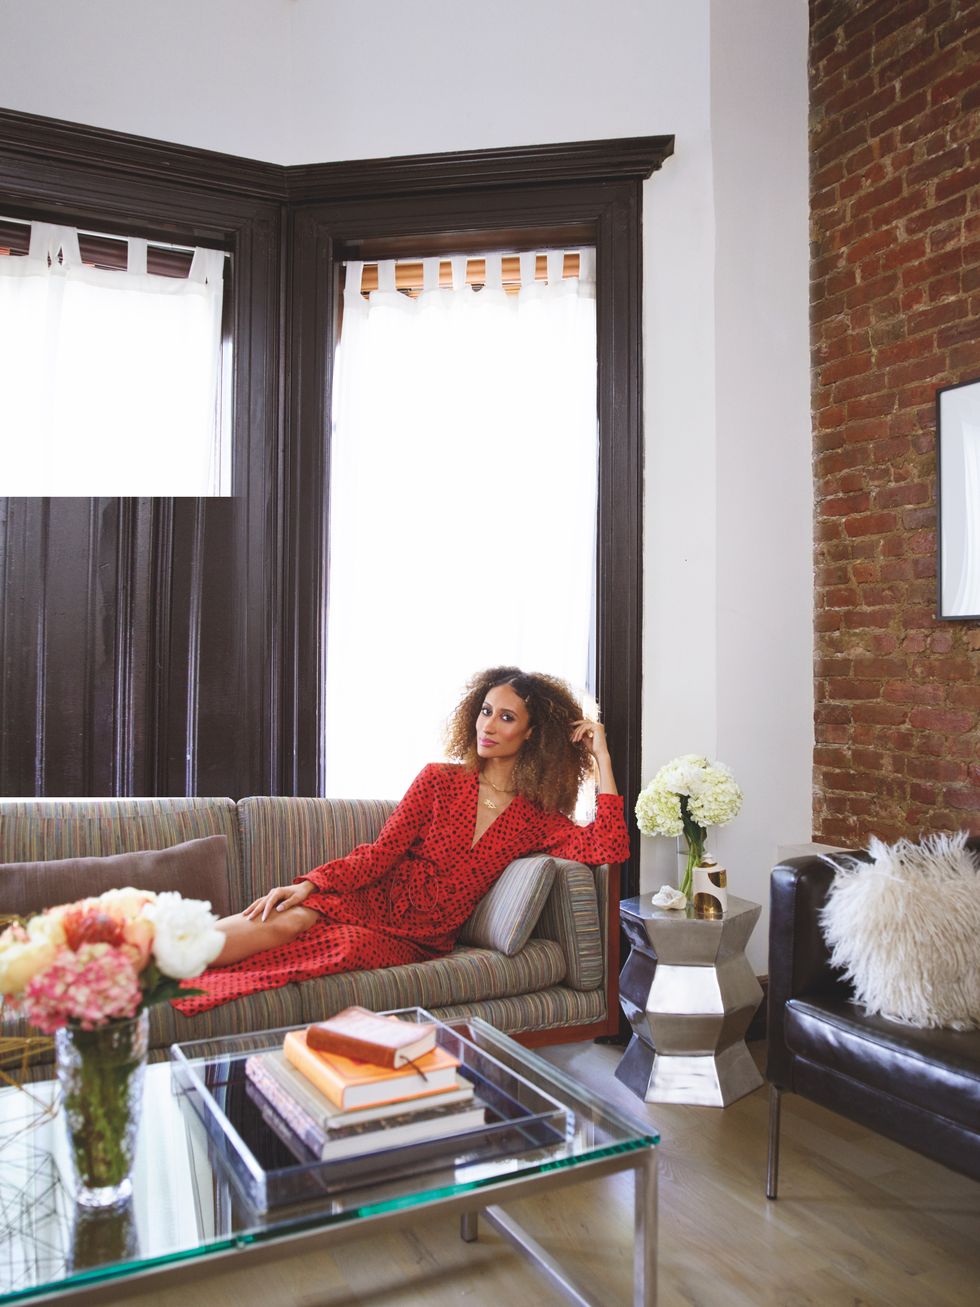 Welcome to Elaine Welteroth's World